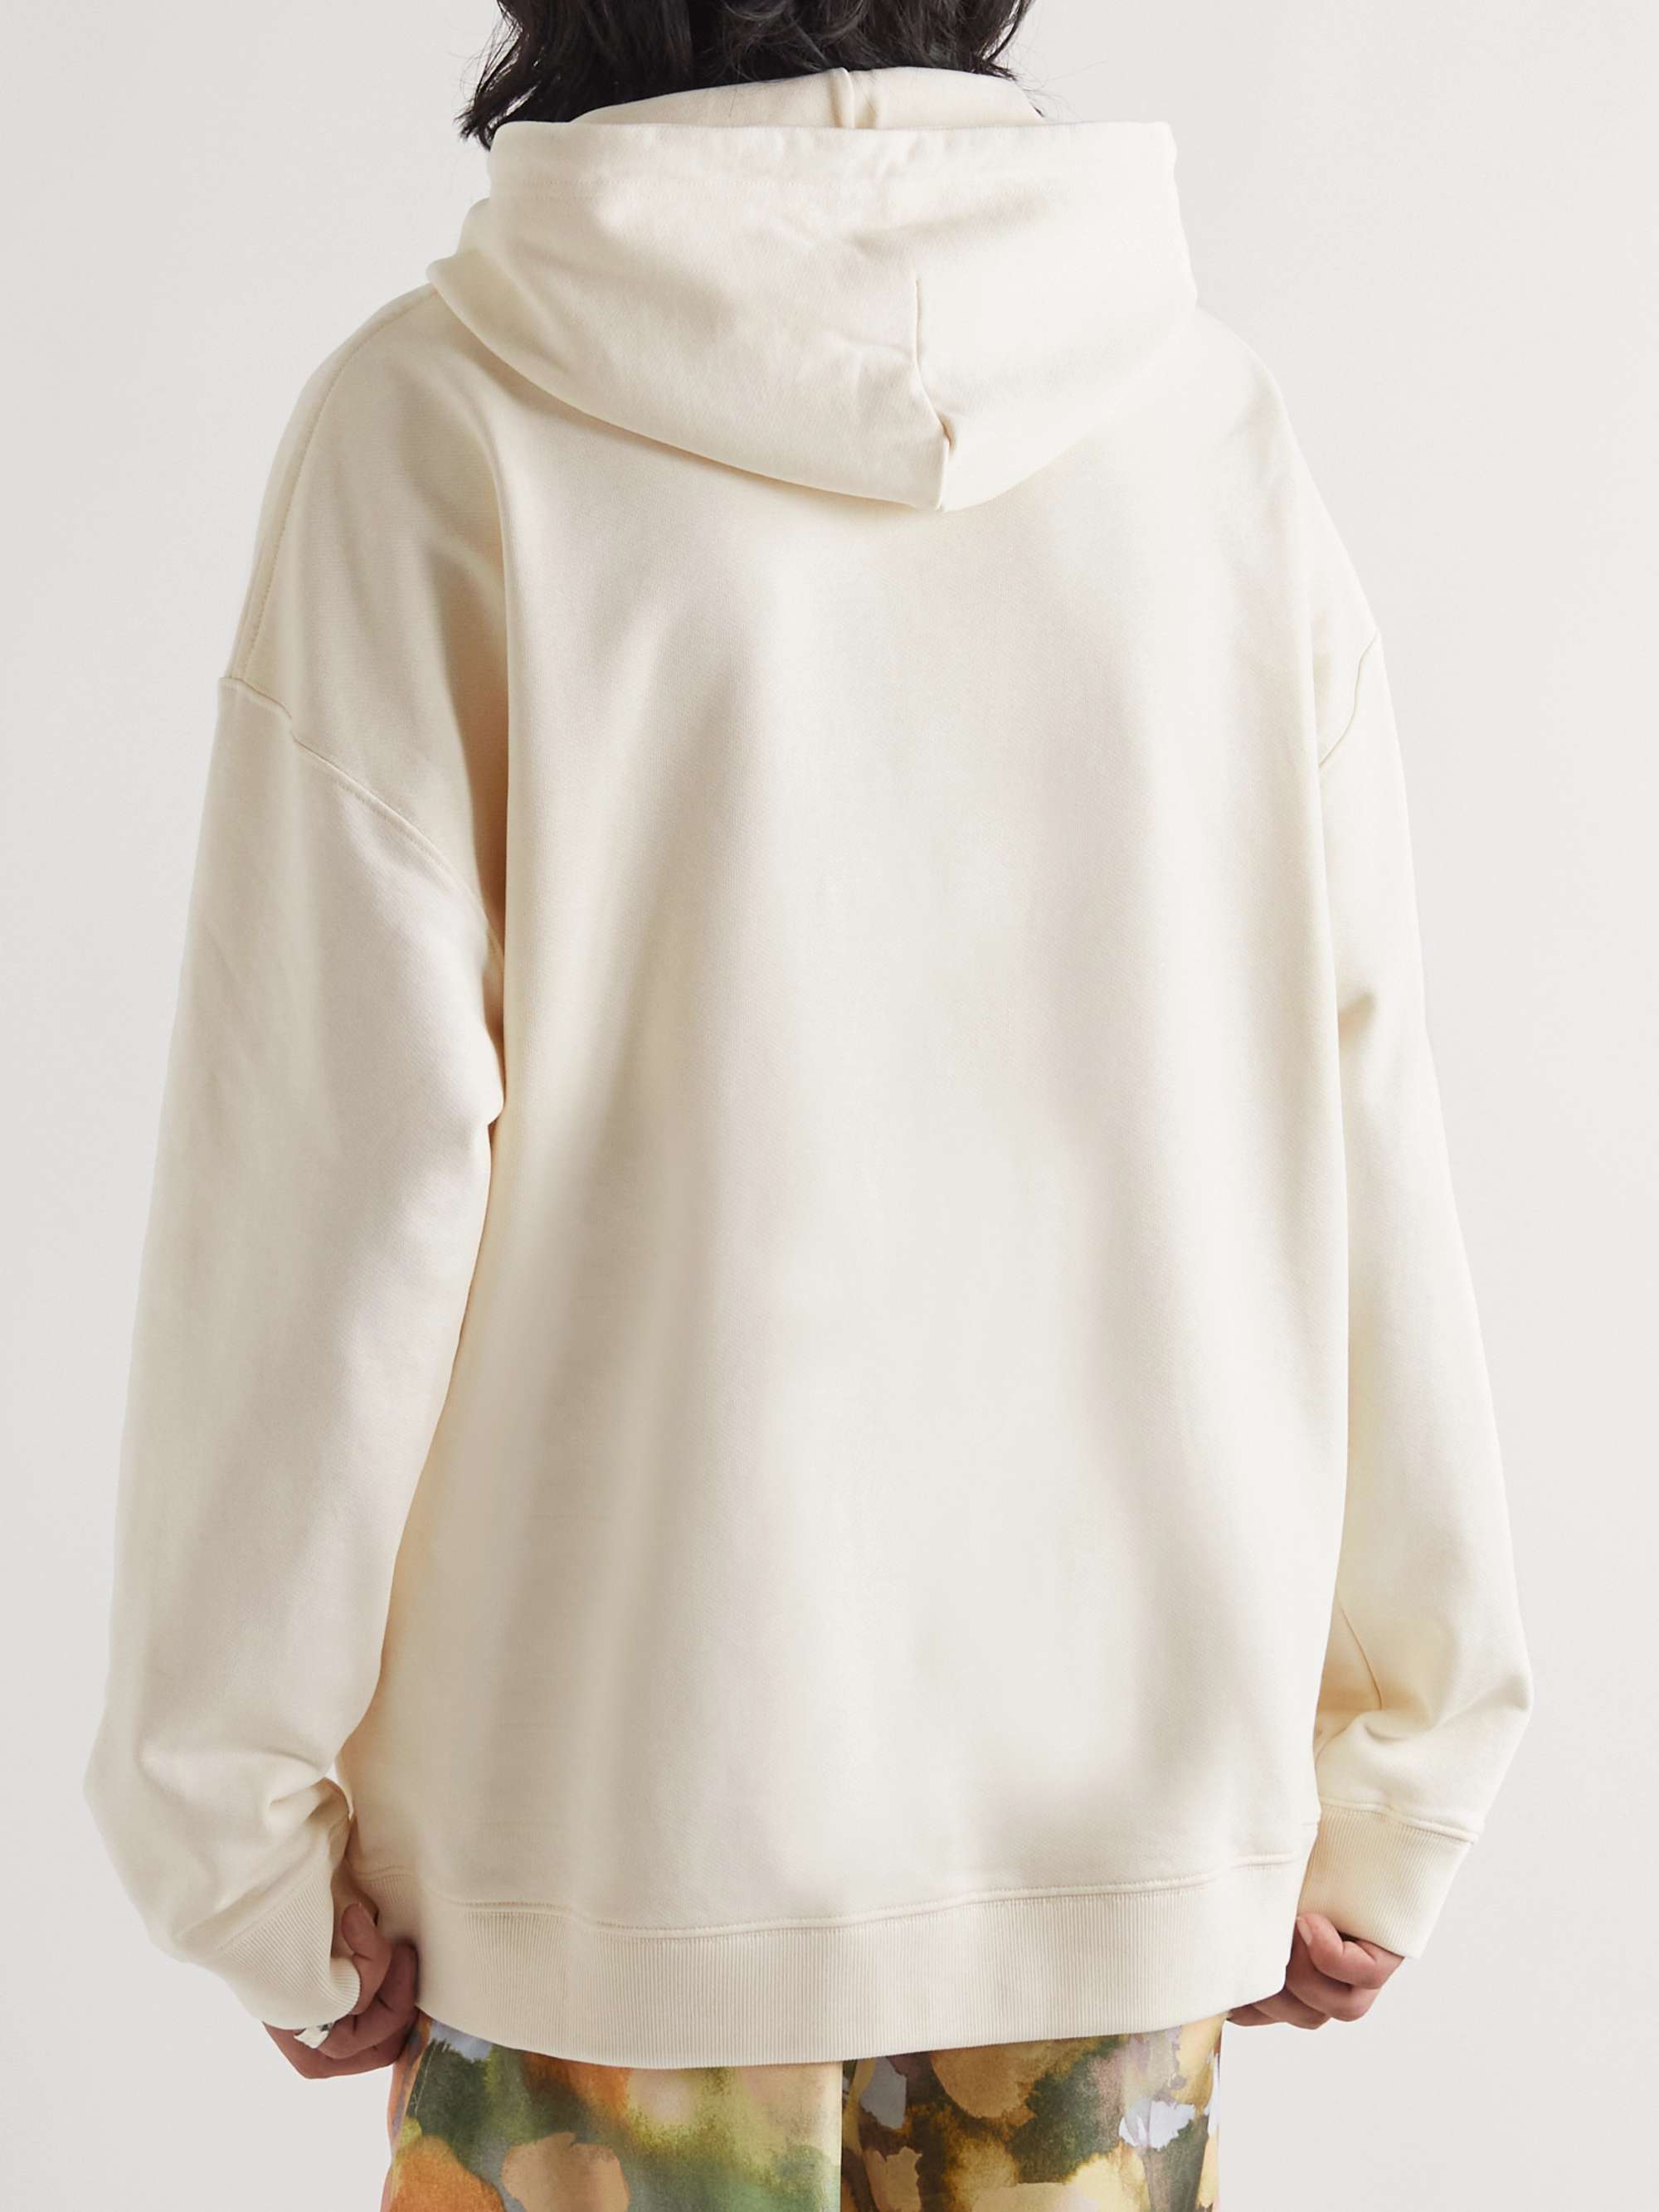 LOEWE Anagram Leather-Trimmed Cotton-Jersey Hoodie